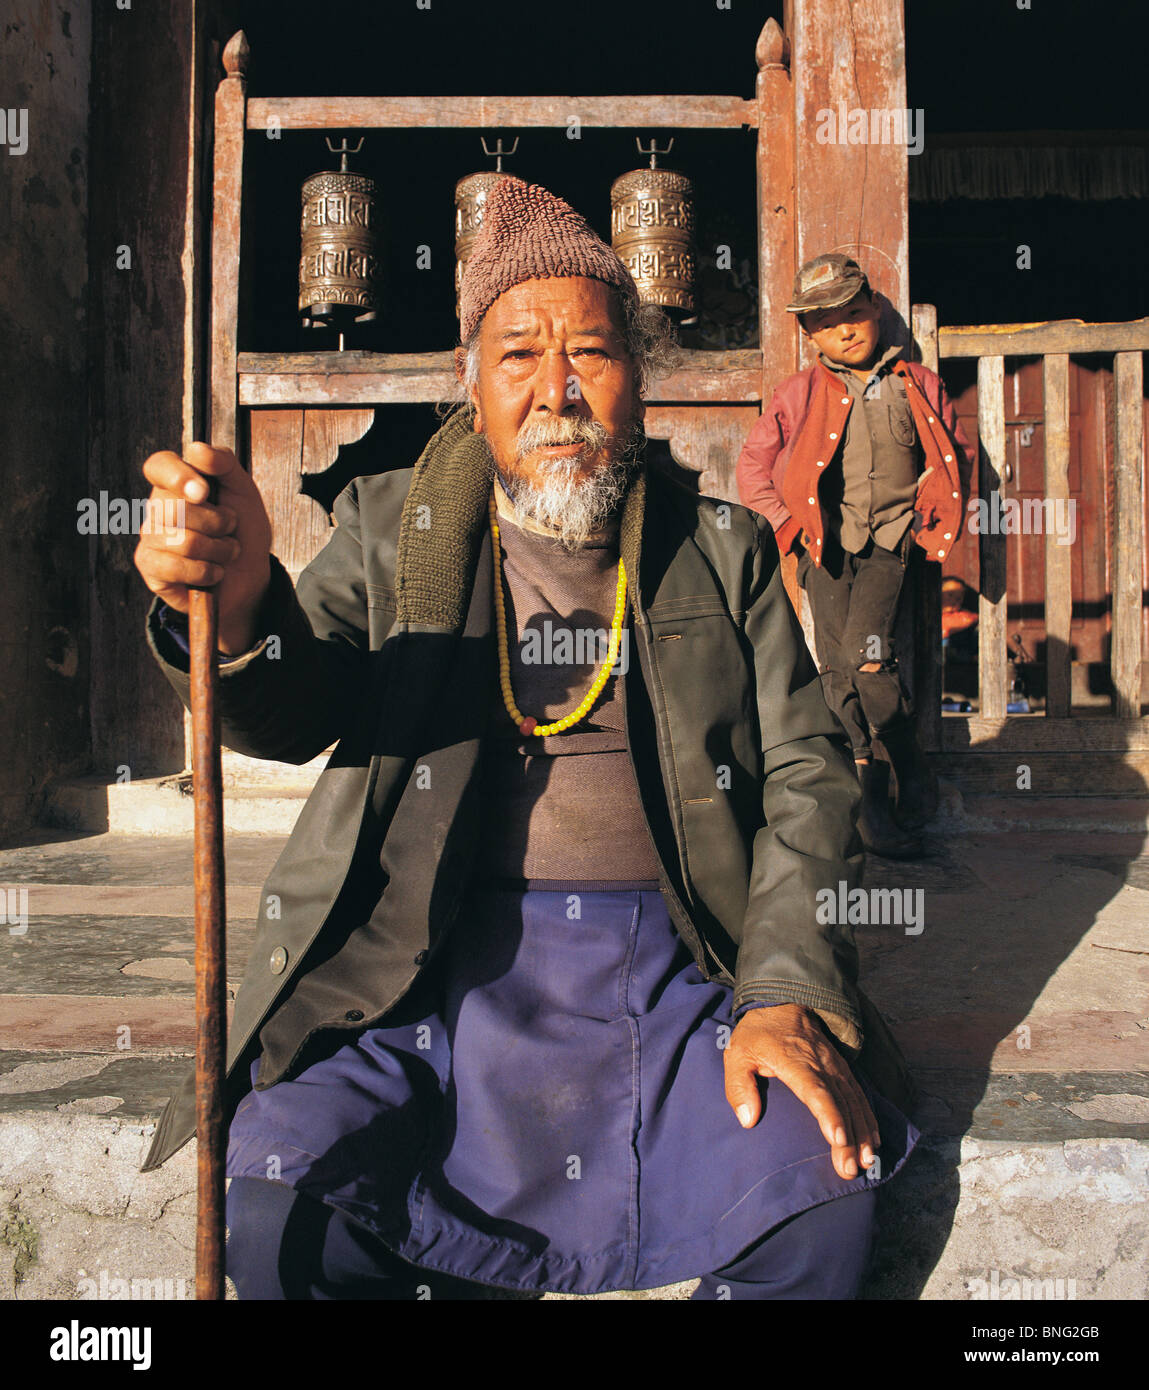 The guardian of the village shrine or gompa at Tarke Gyang in the Helambu region of central Nepal Stock Photo